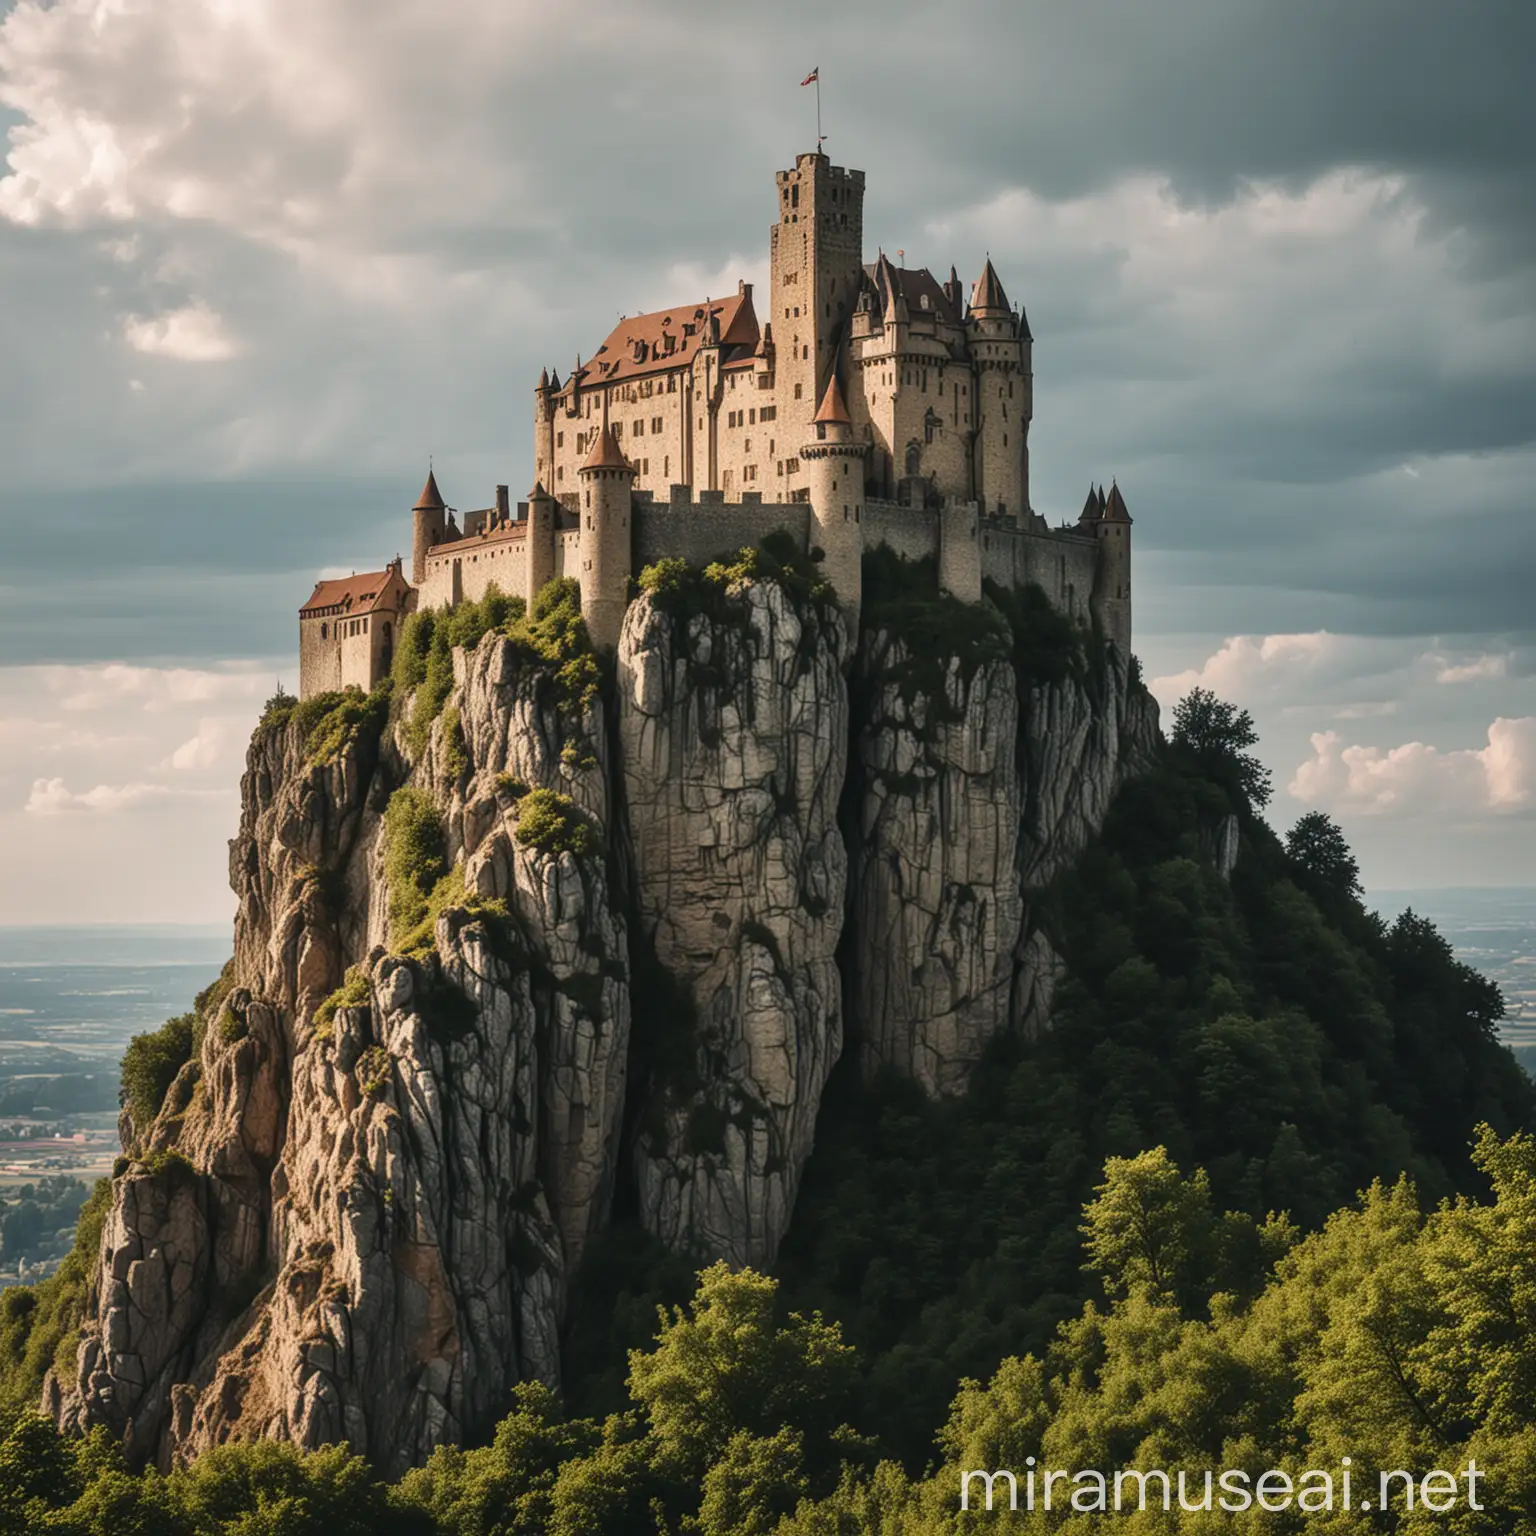 Medieval castle on top of a cliff
